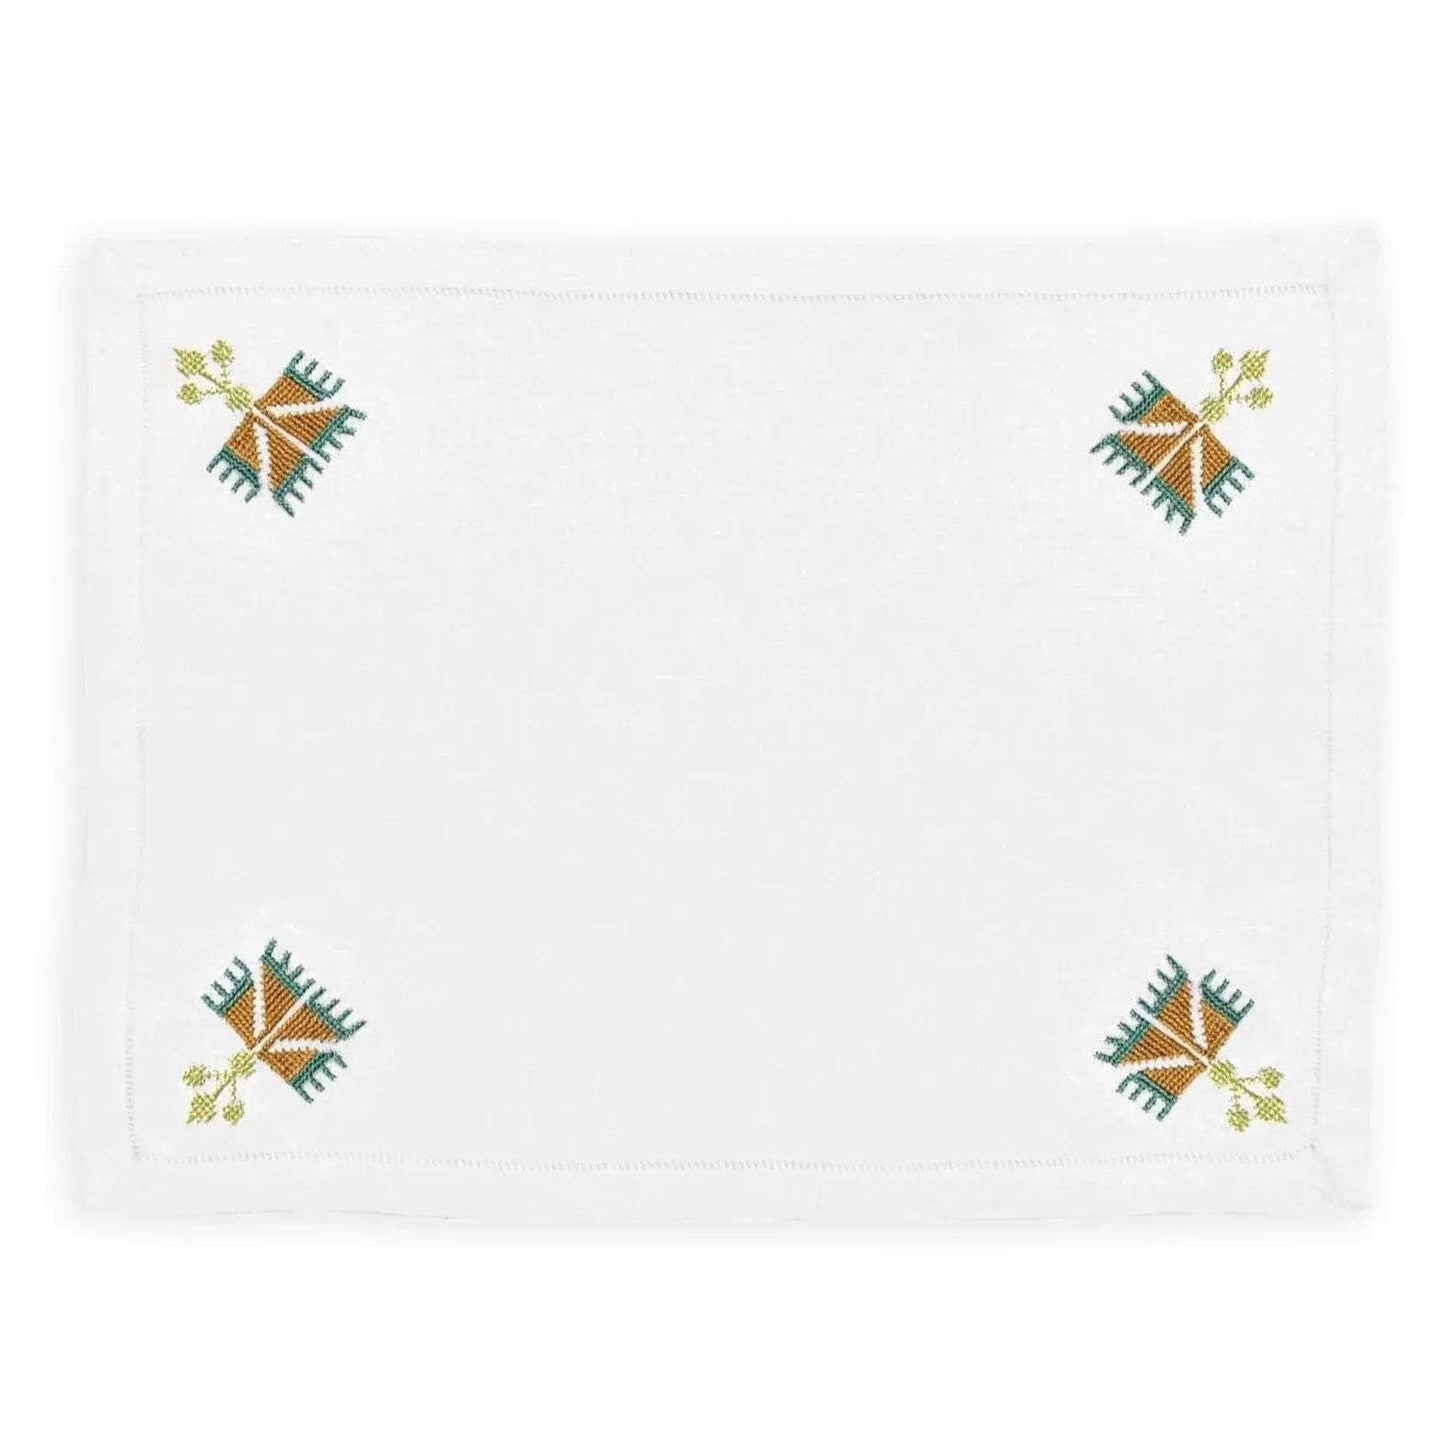 Load image into Gallery viewer, Ottoman Carnation Placemat
